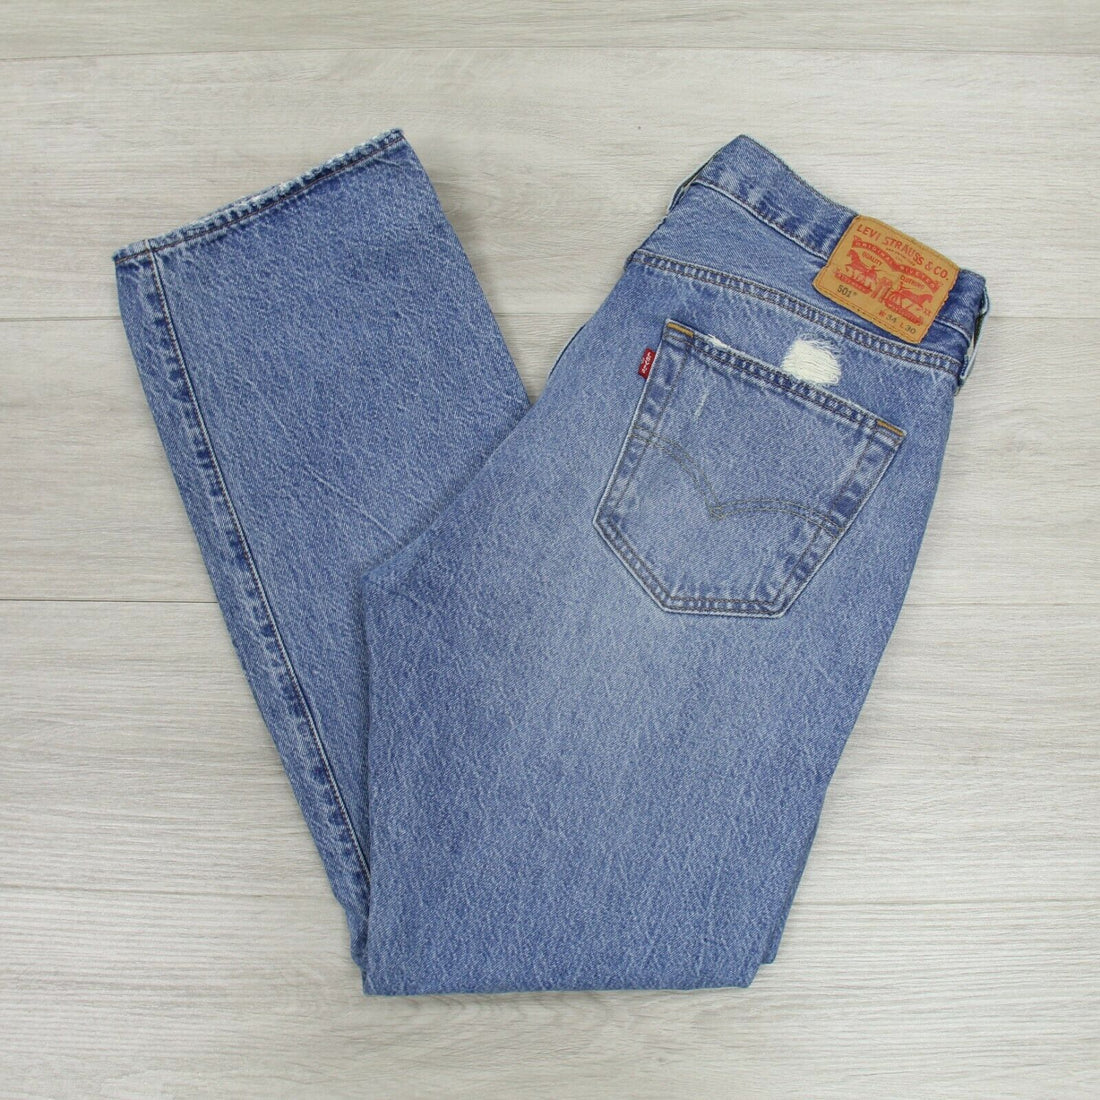 Levi Strauss & Co 501 Denim Jeans Size 34 X 30 Stone Wash Button Fly D –  Throwback Vault